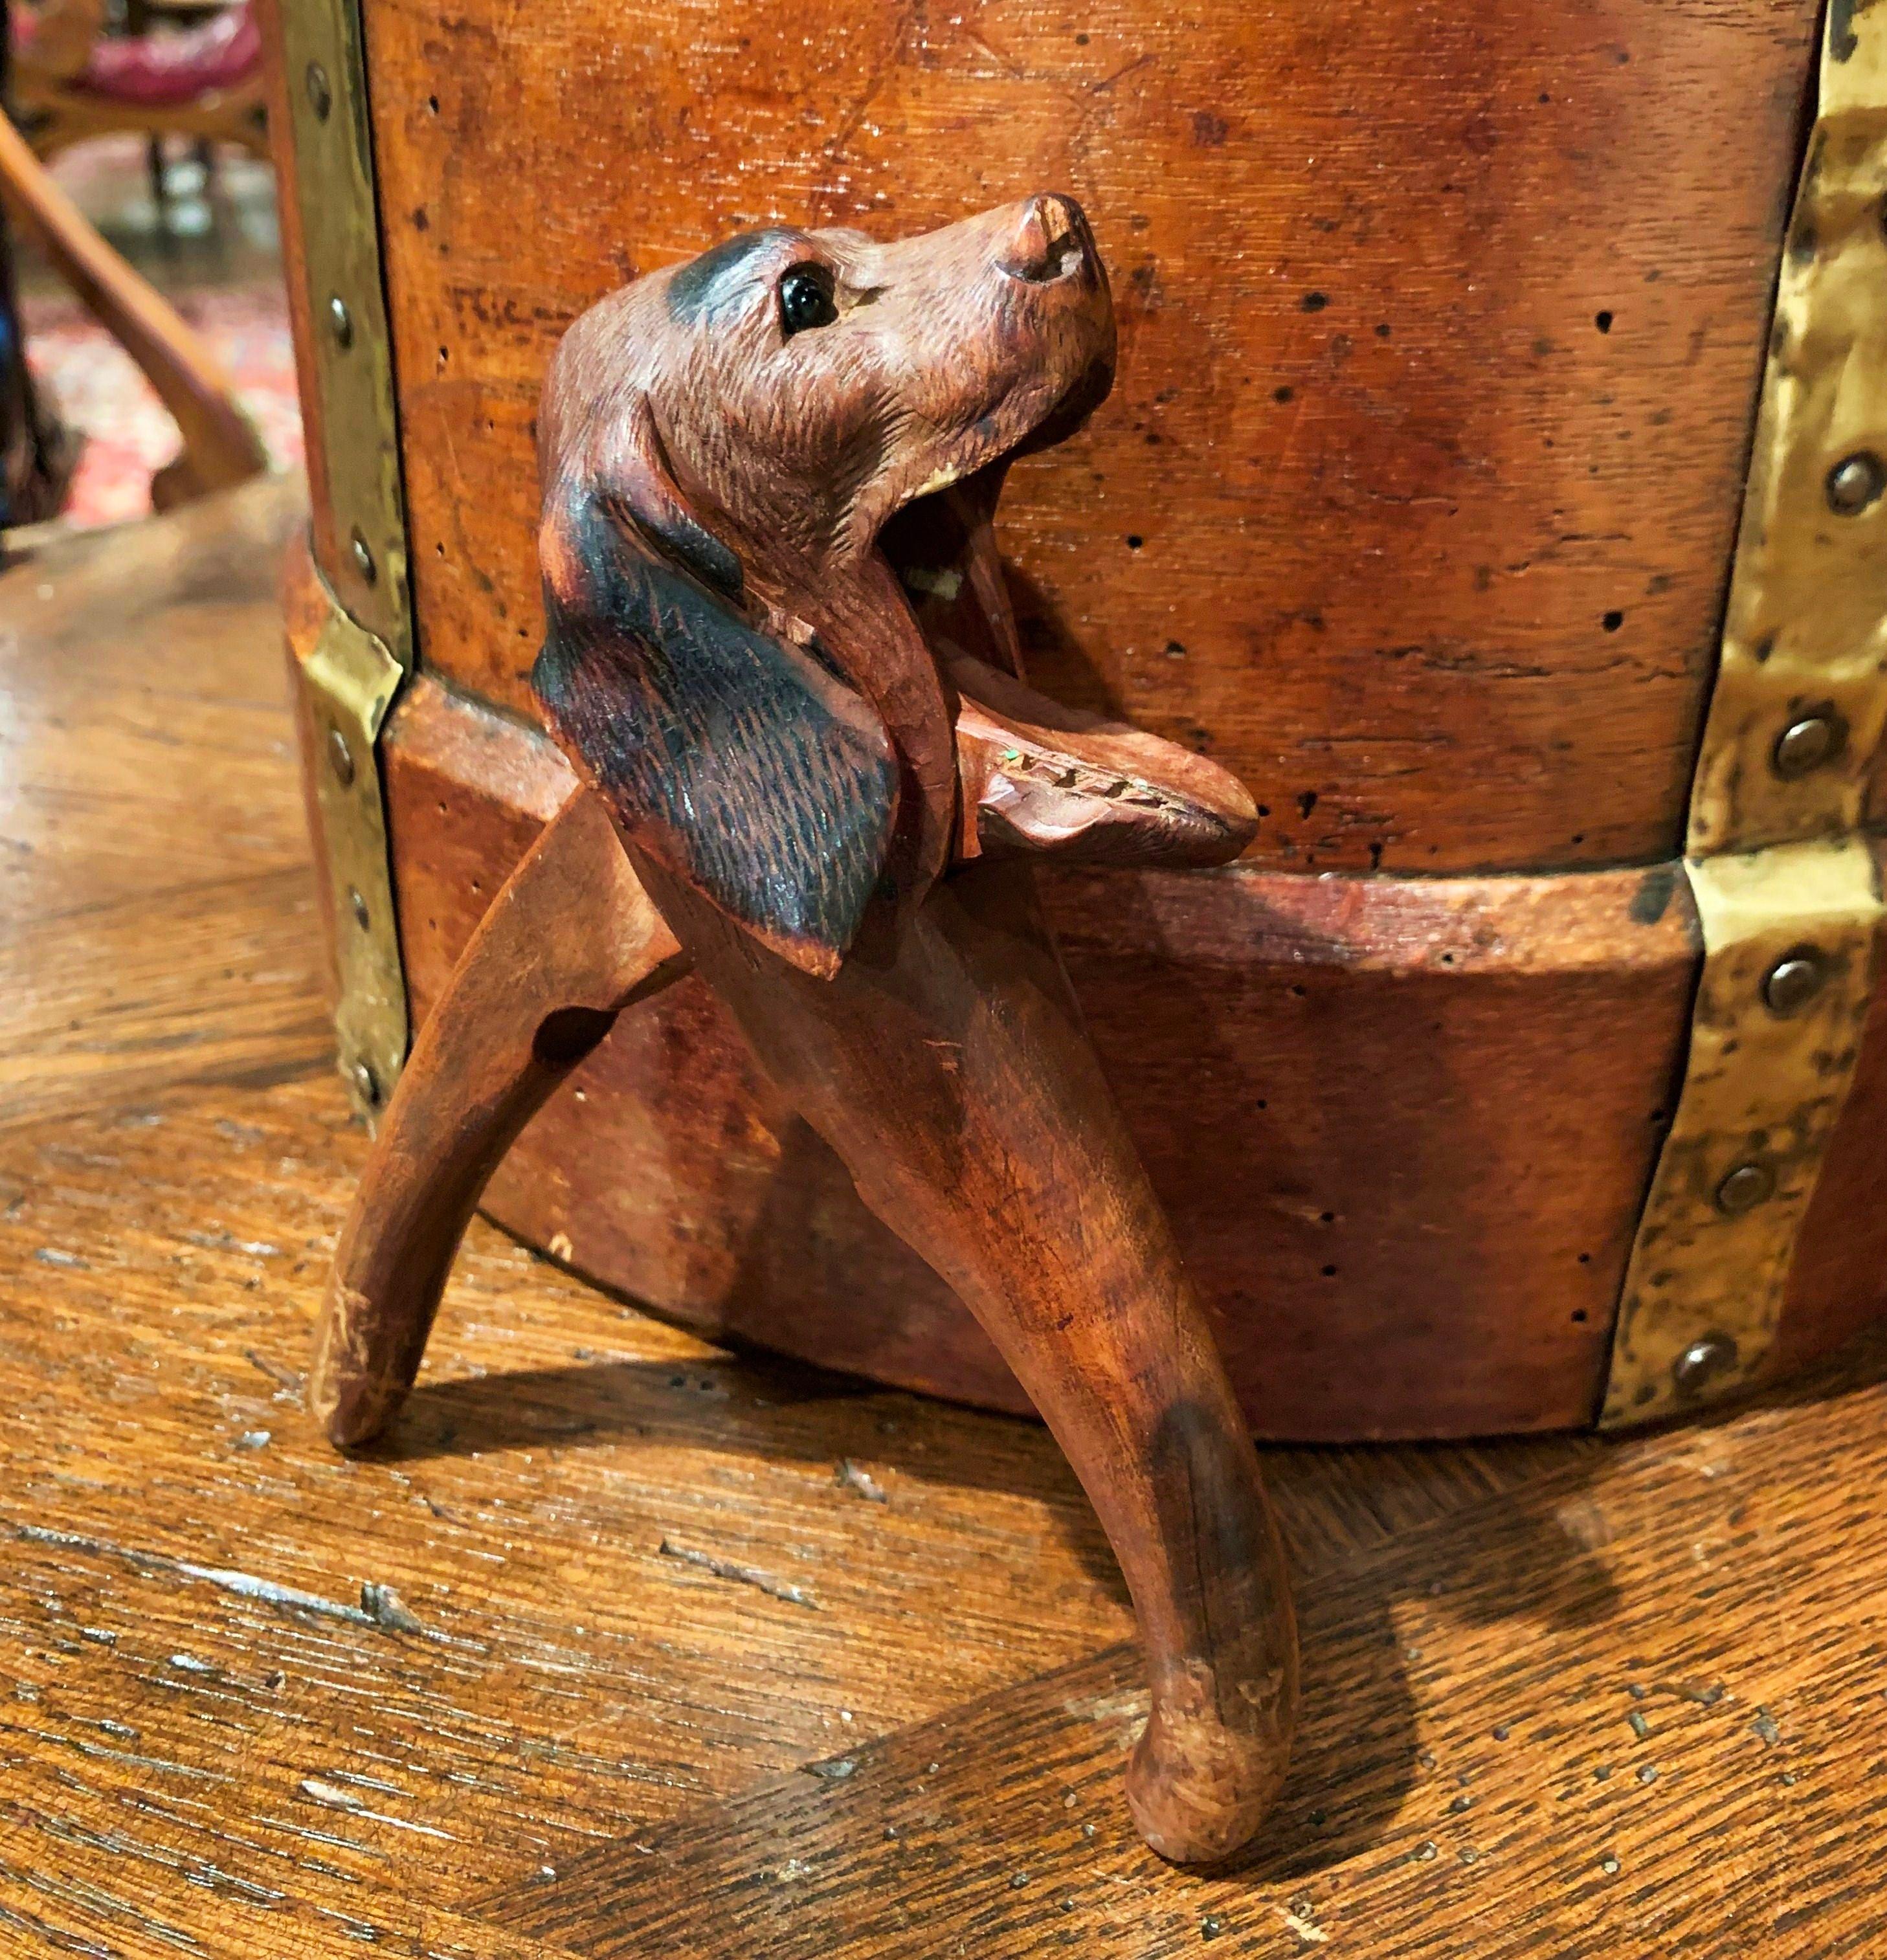 This interesting fruitwood nutcracker was crafted in France, circa 1880, made of walnut, the kitchen utensil features a carved dog head sculpture with horns and embellished with glass eyes. The functional and practical compound lever is in excellent